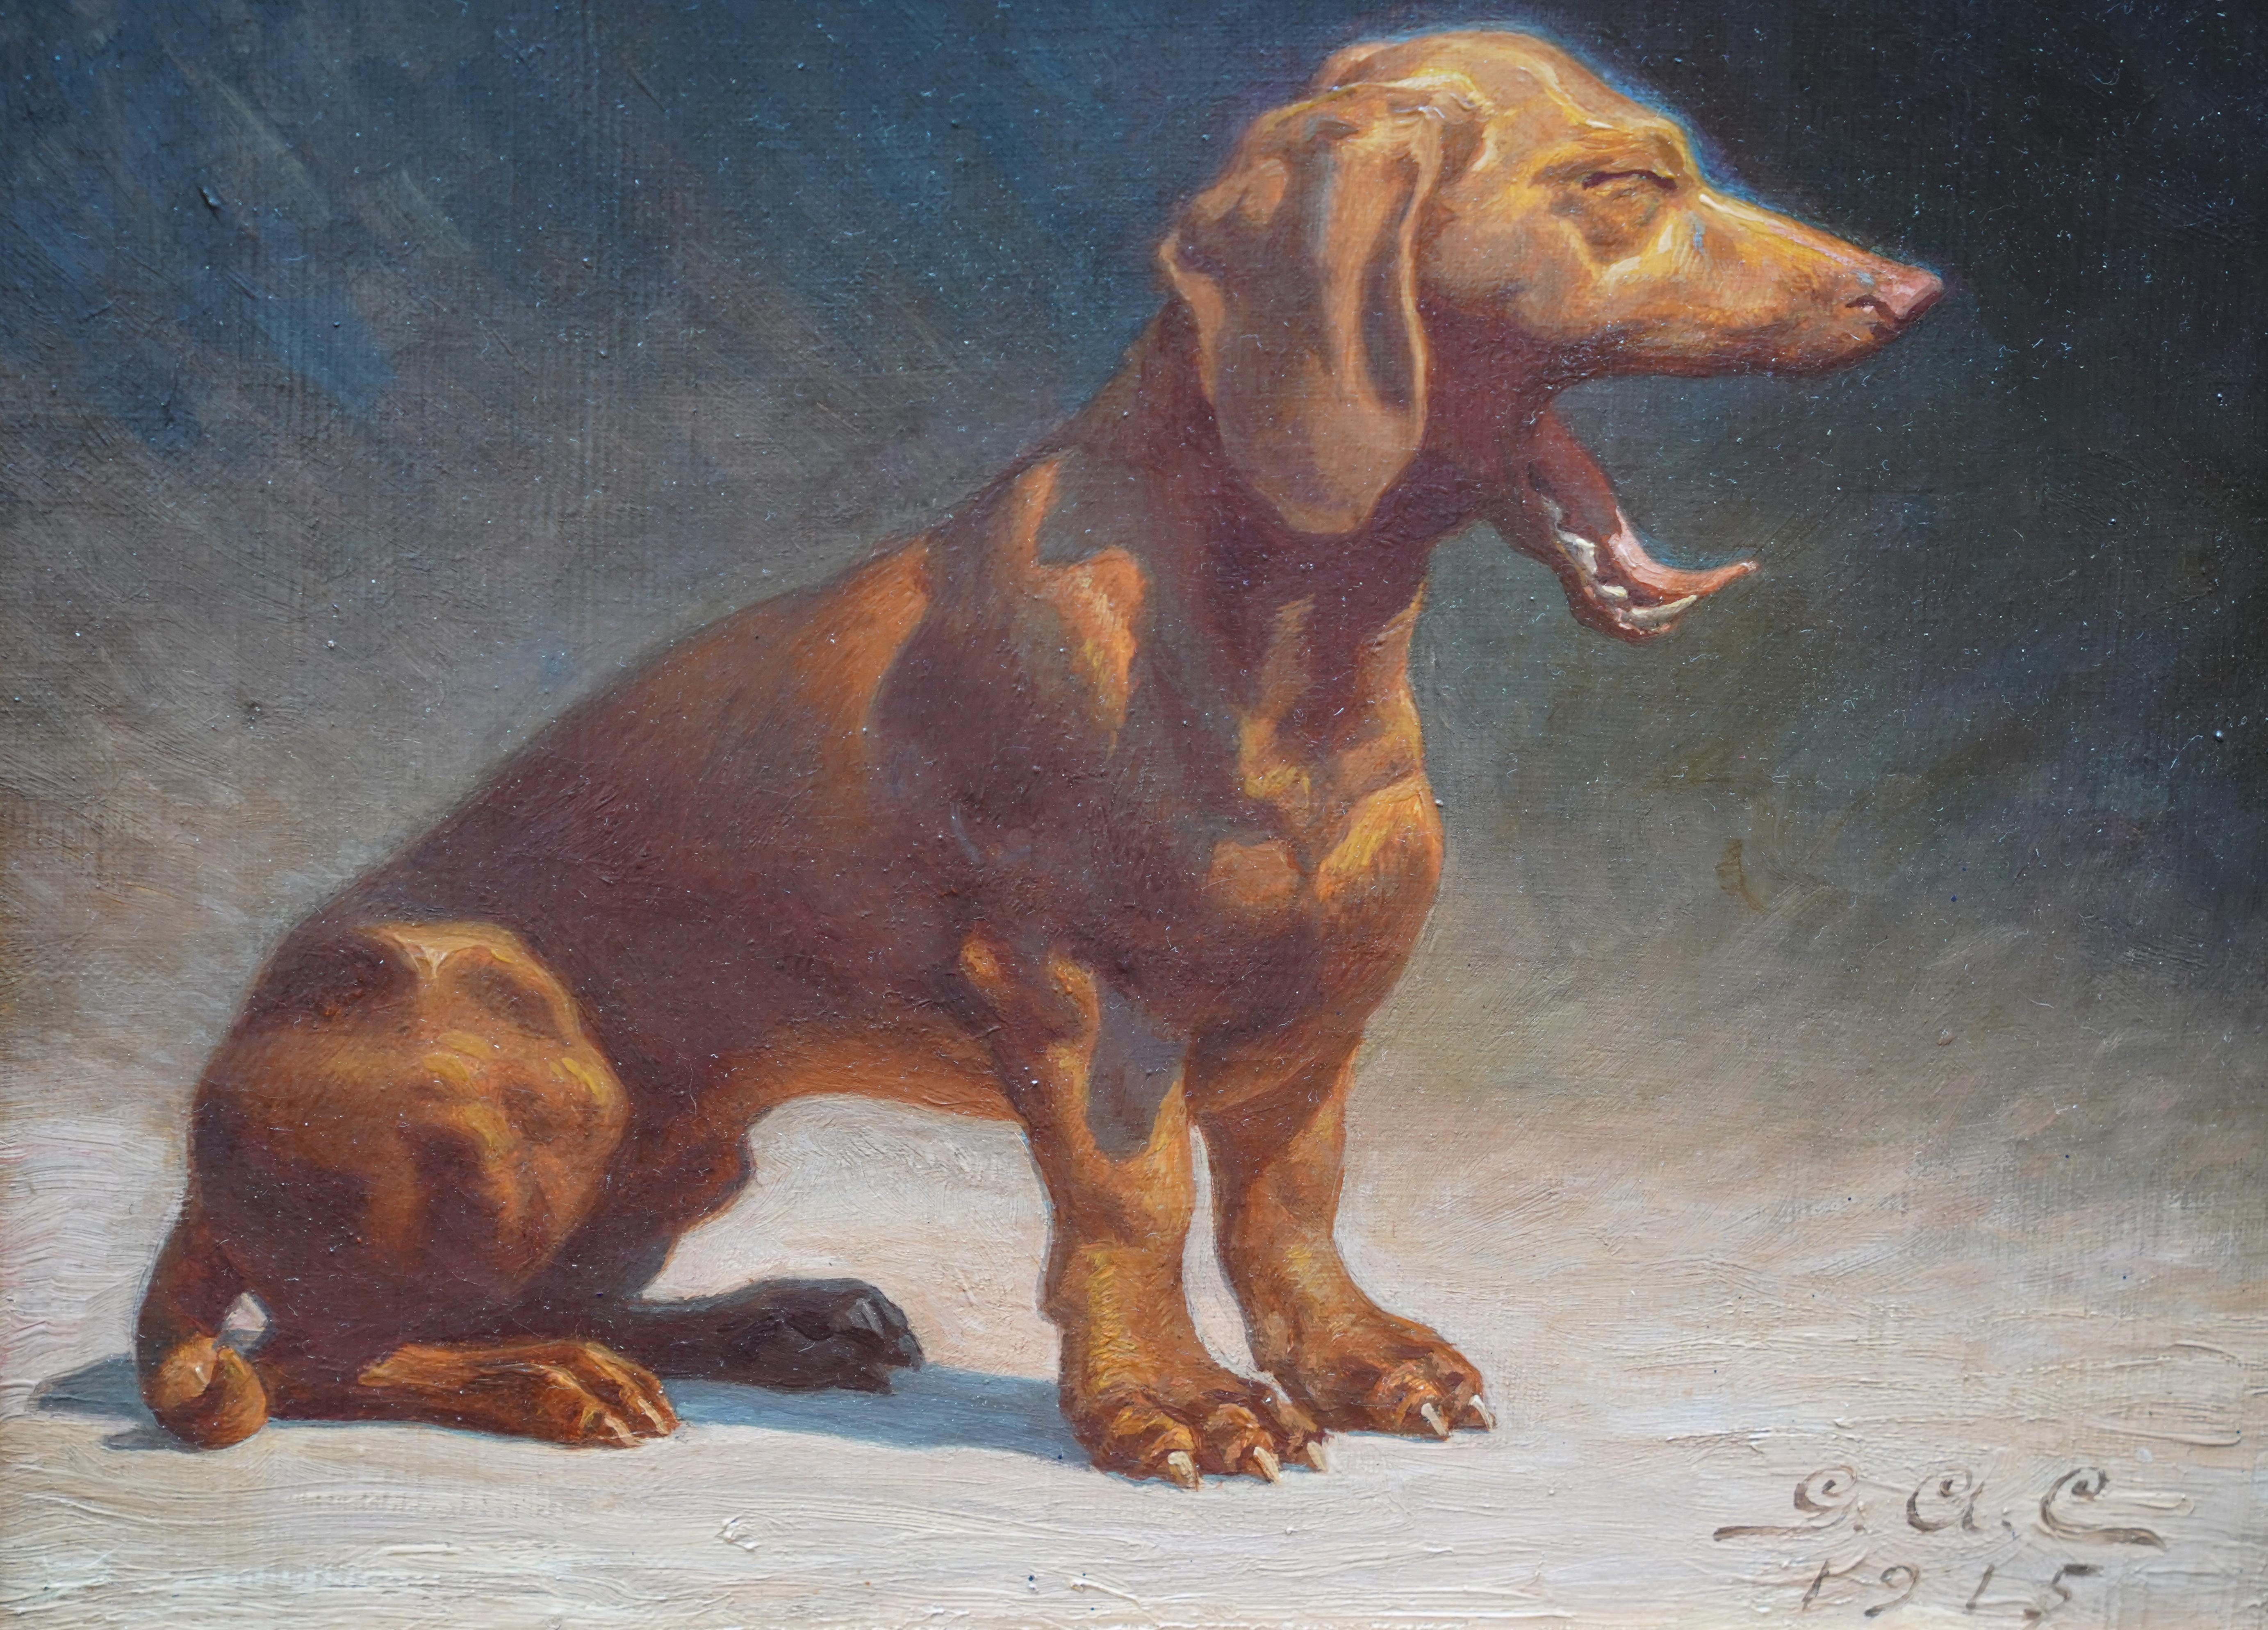 Portrait of a Yawning Dachshund - Animal 1915 art oil painting - Painting by Unknown